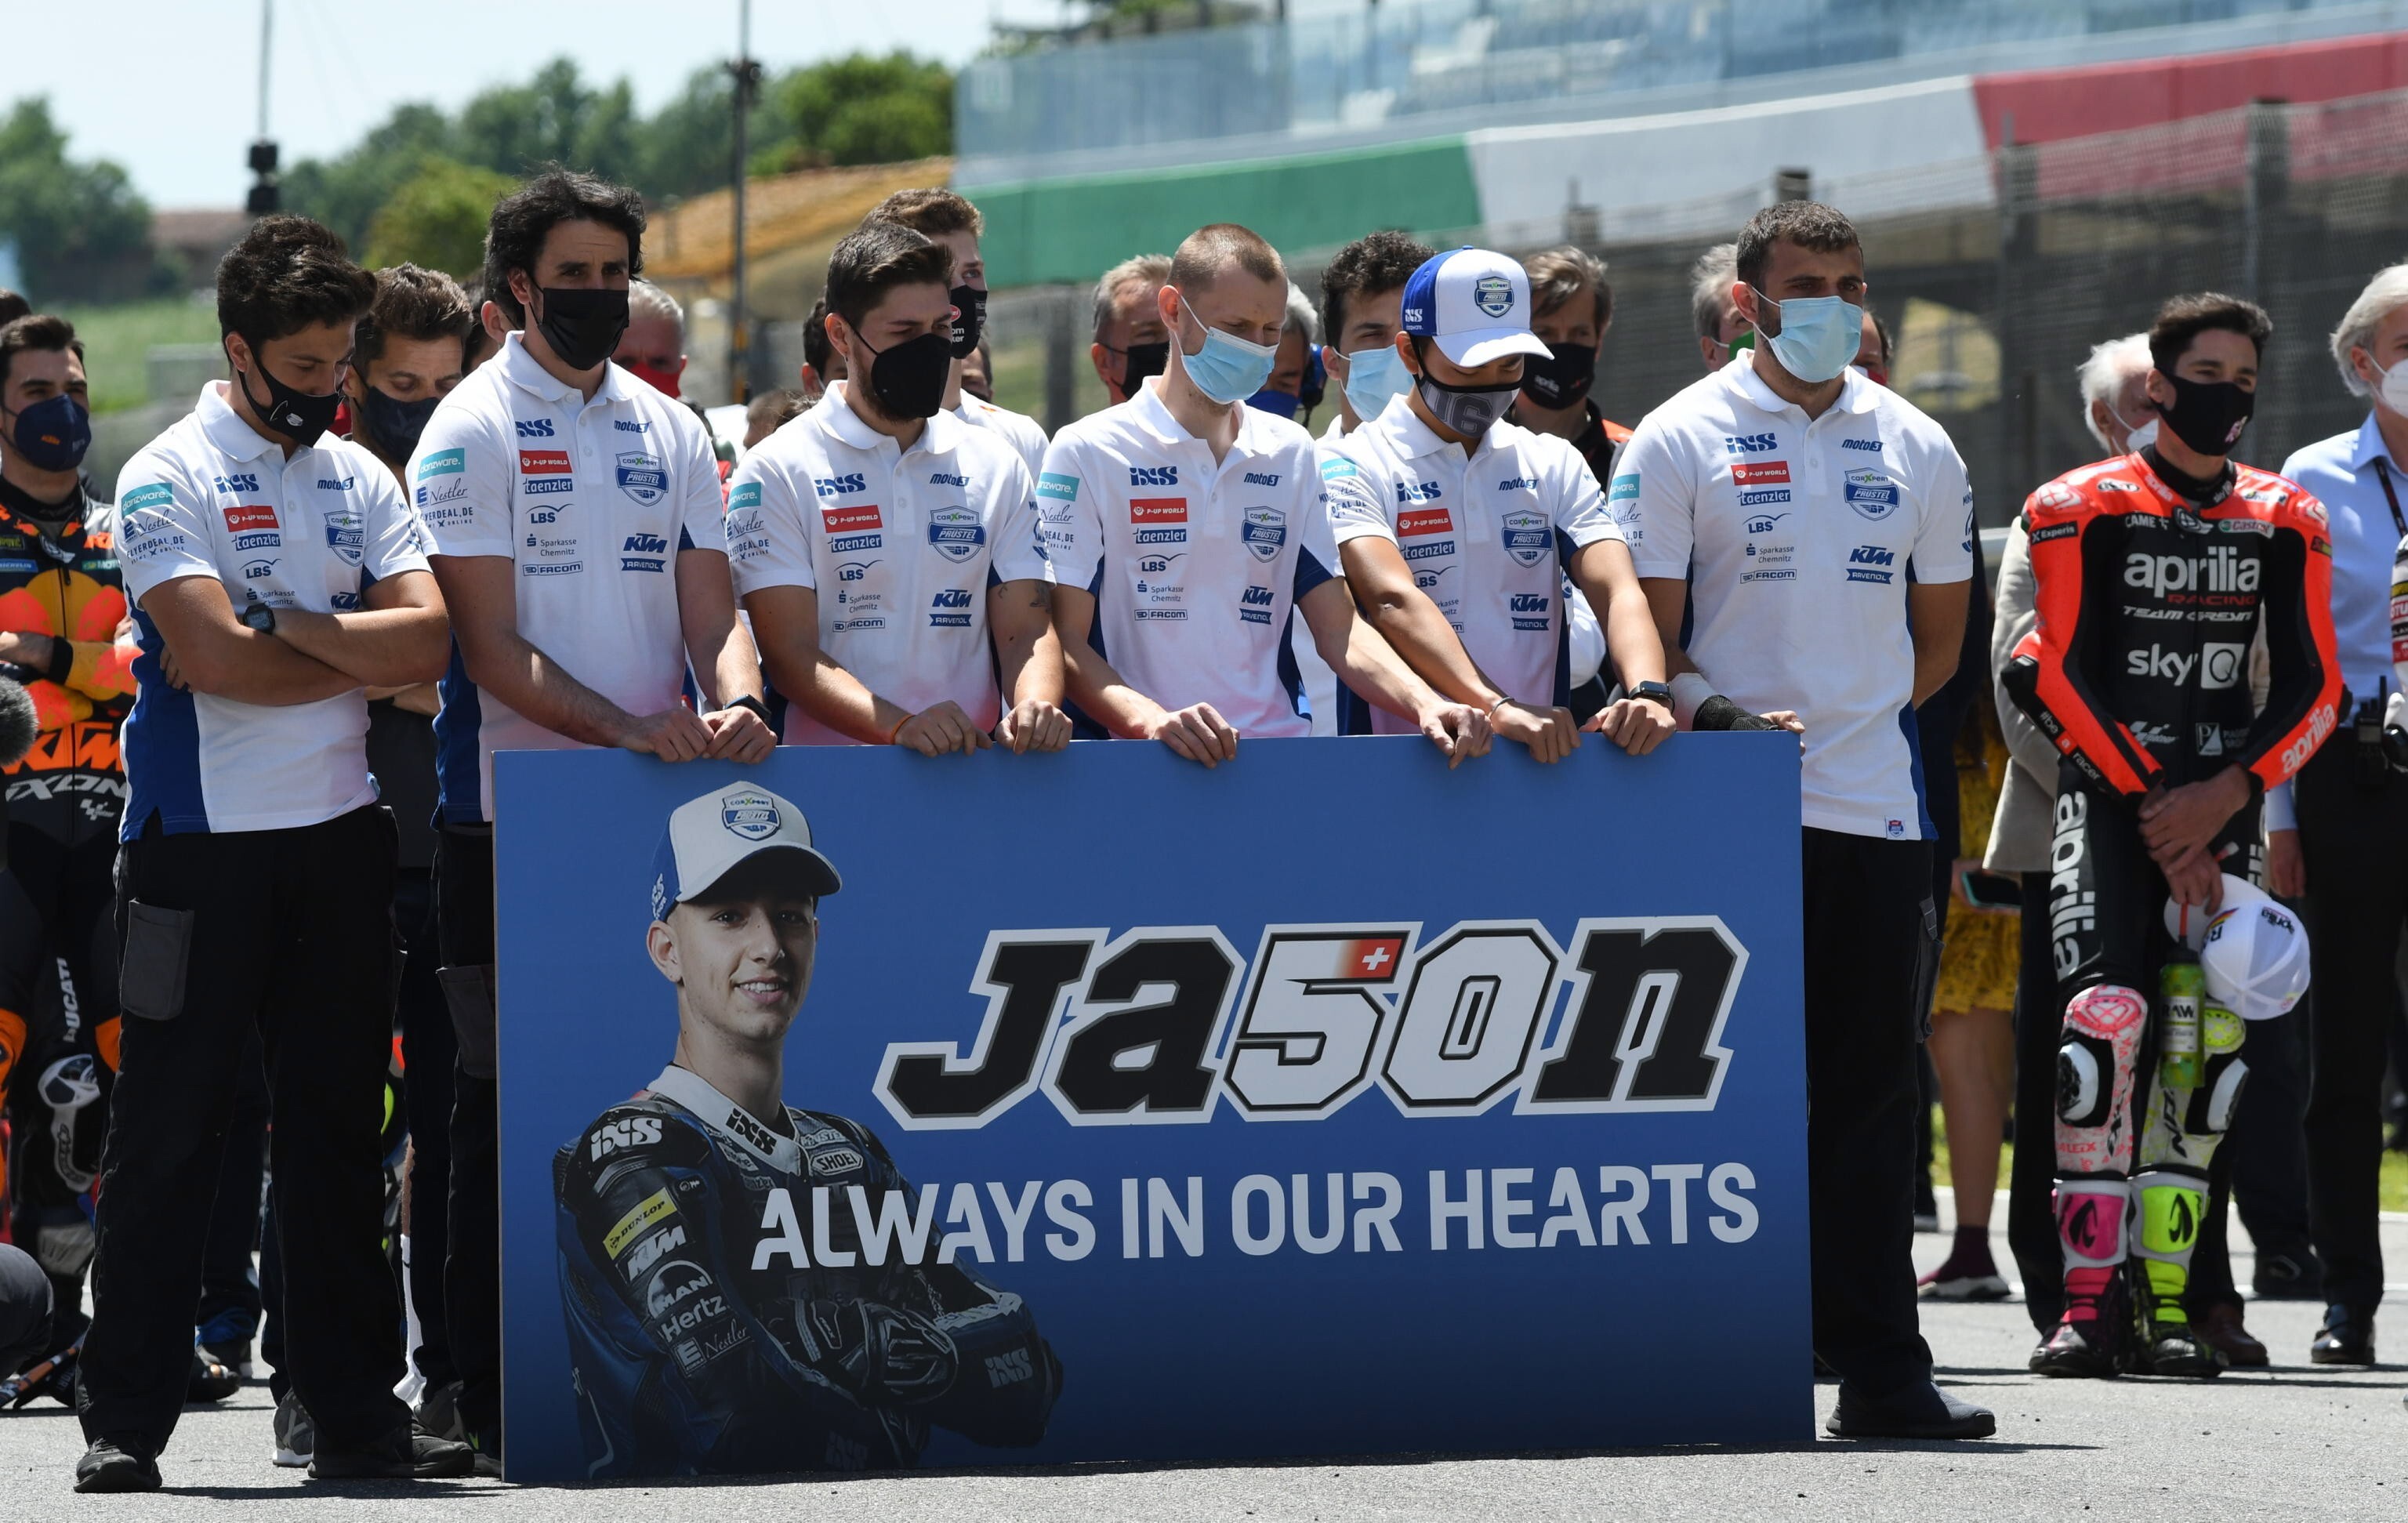 MotoGP riders and teams line up for a one-minute of silence in memory of Jason Dupasquier, who died at the Mugello circuit in Scarperia, Italy on Sunday. Photo: EPA-EFE